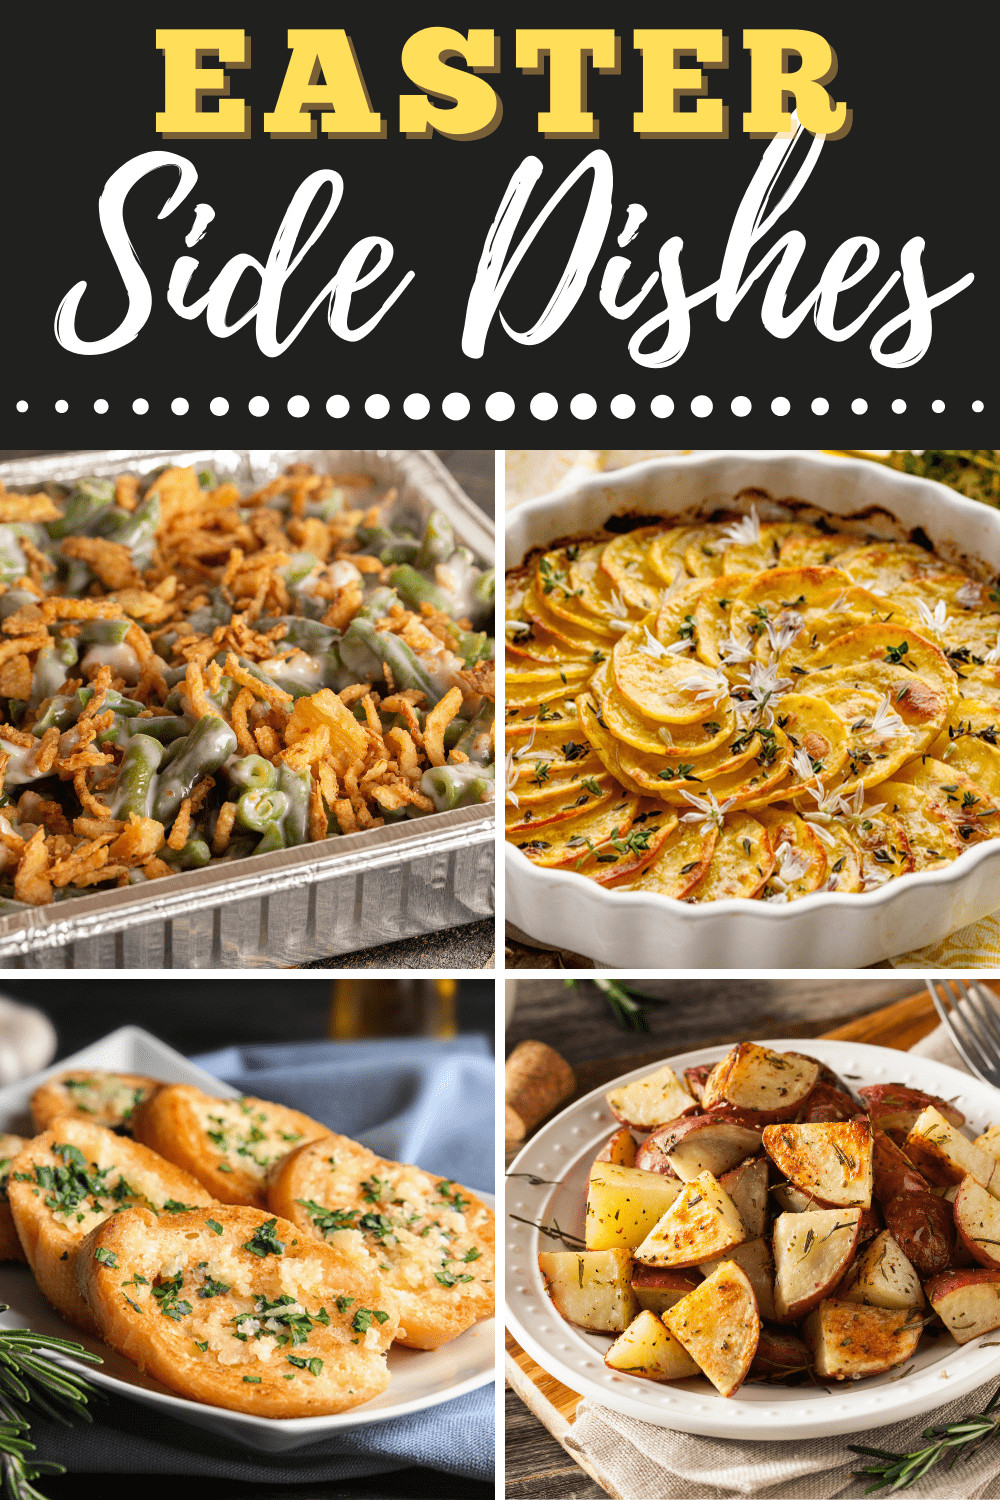 Easter Lunch Side Dishes
 30 Easter Side Dishes for the Perfect Holiday Meal